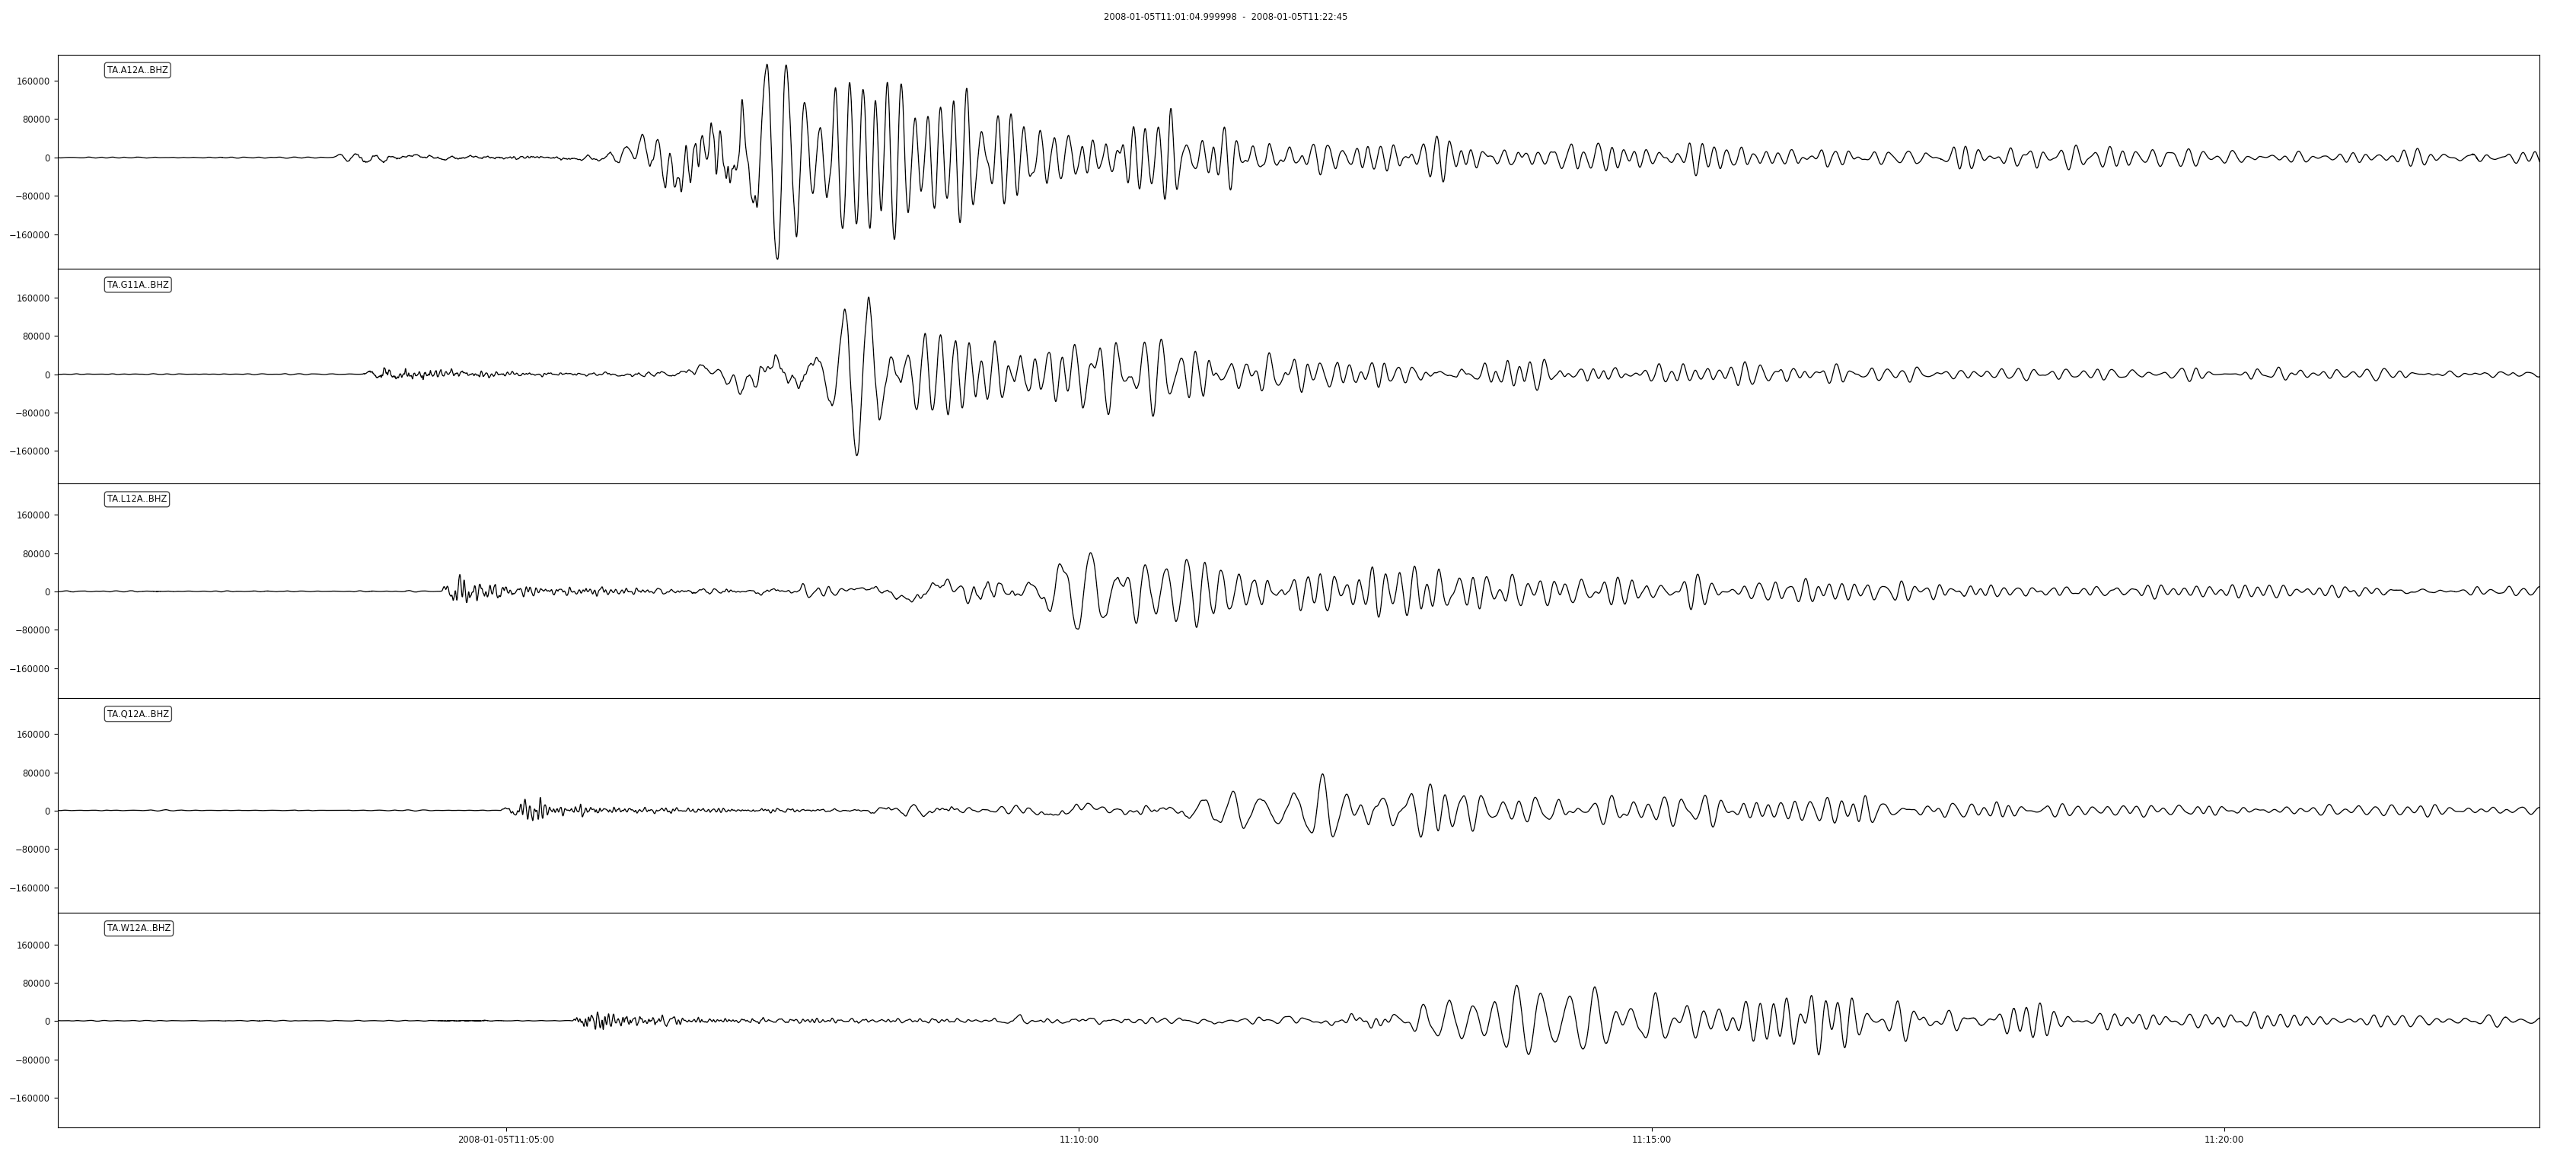 Signal from the M6.5, Haida Gwaii earthquake, origin time: 2008-01-05T11:01:05.55Z on selected USArray TA stations